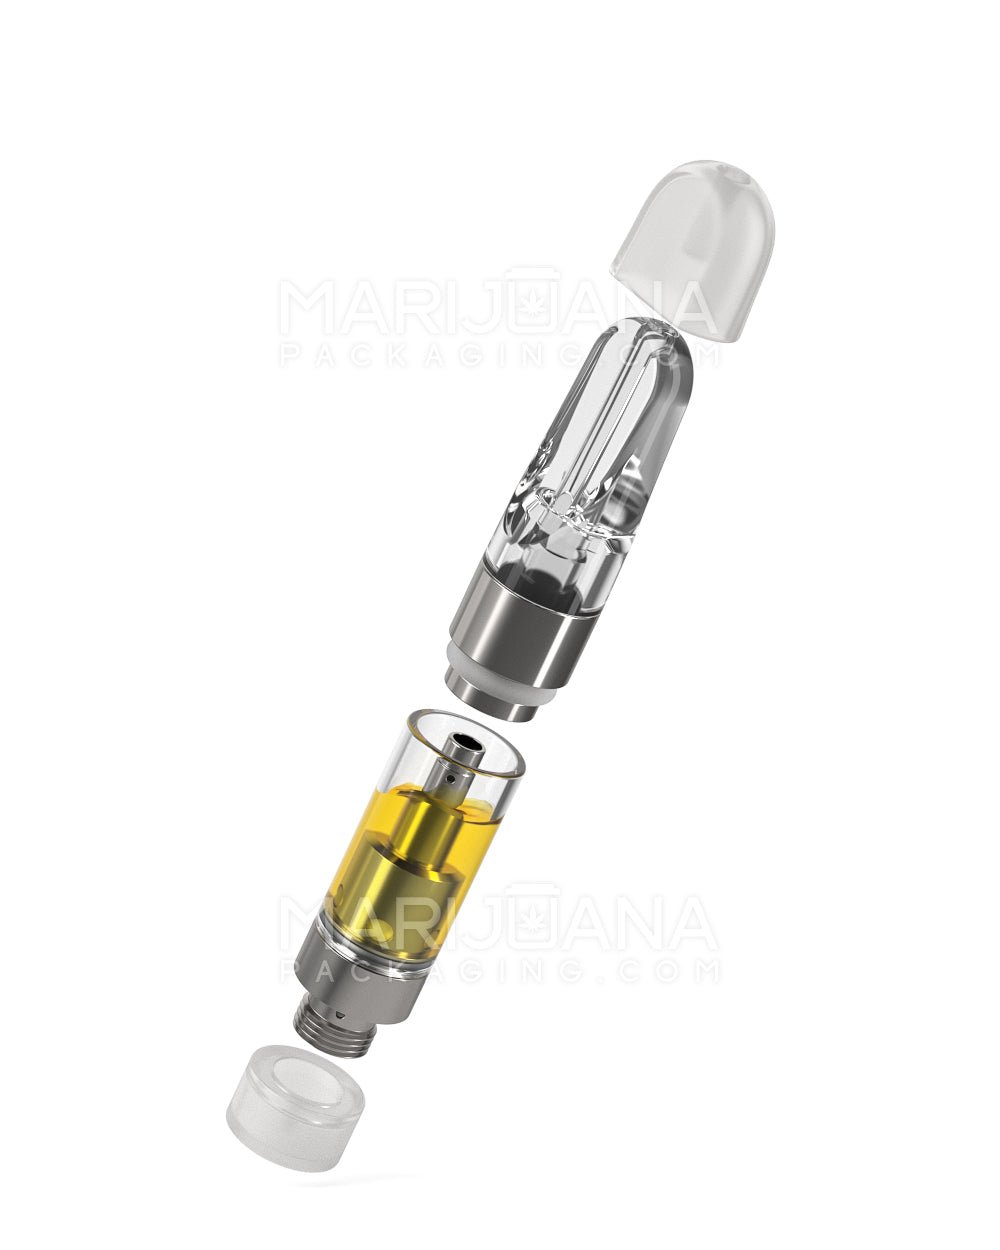 Ceramic Core Glass Vape Cartridge with Flat Clear Plastic Mouthpiece | 0.5mL - Press On - 1600 Count - 8